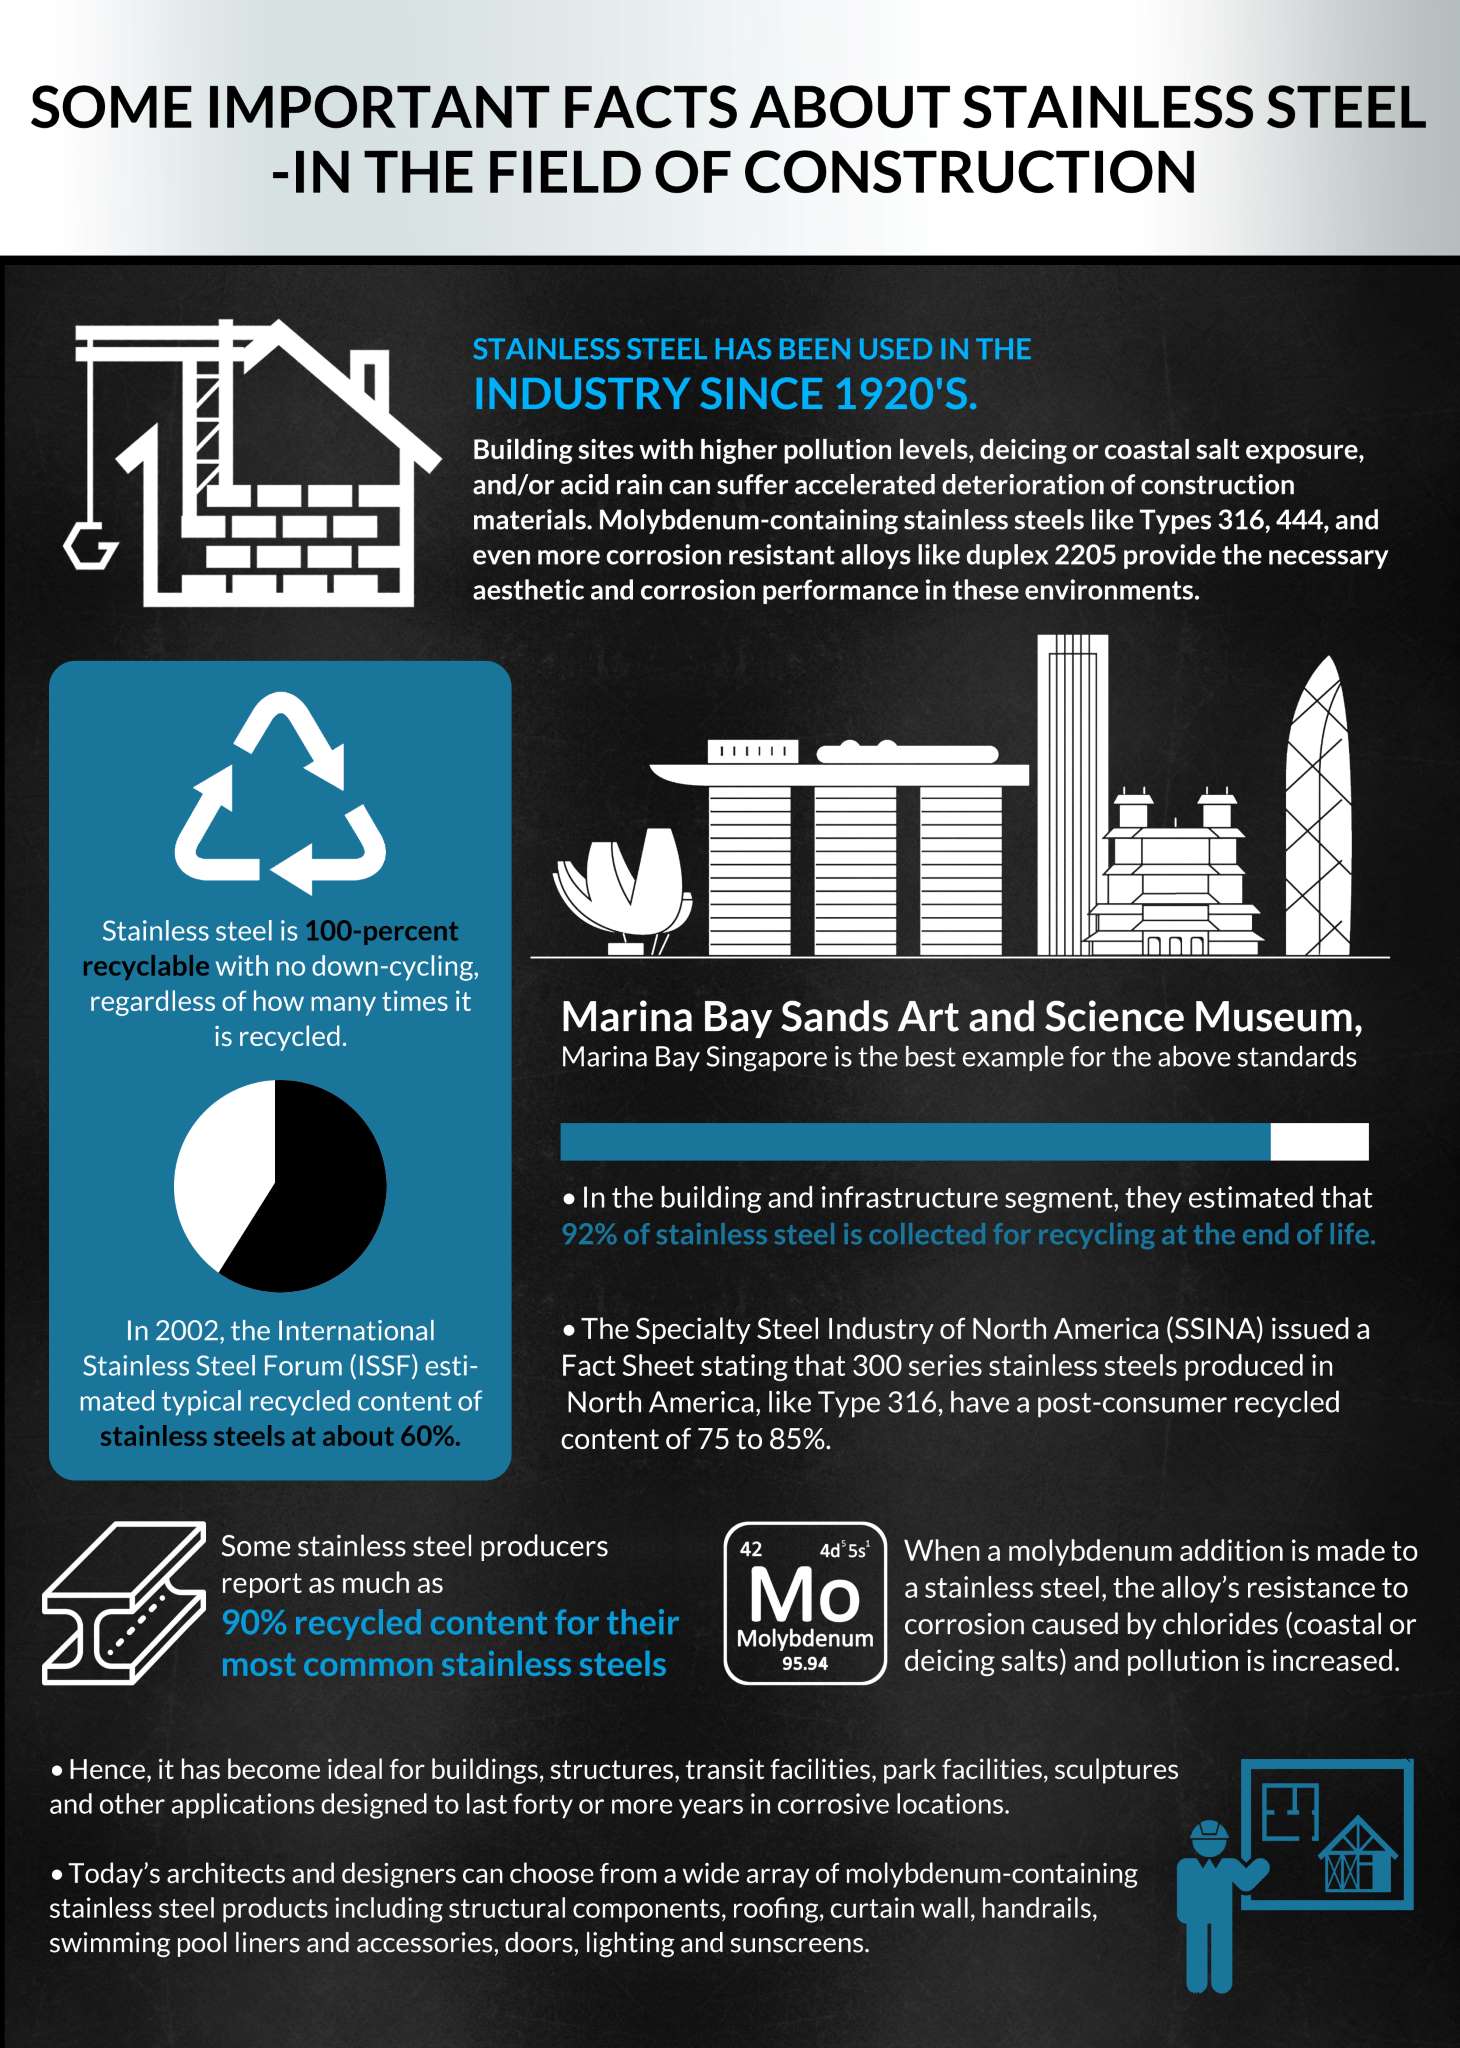 Infographic image of important facts about stainless steel in the field of construction